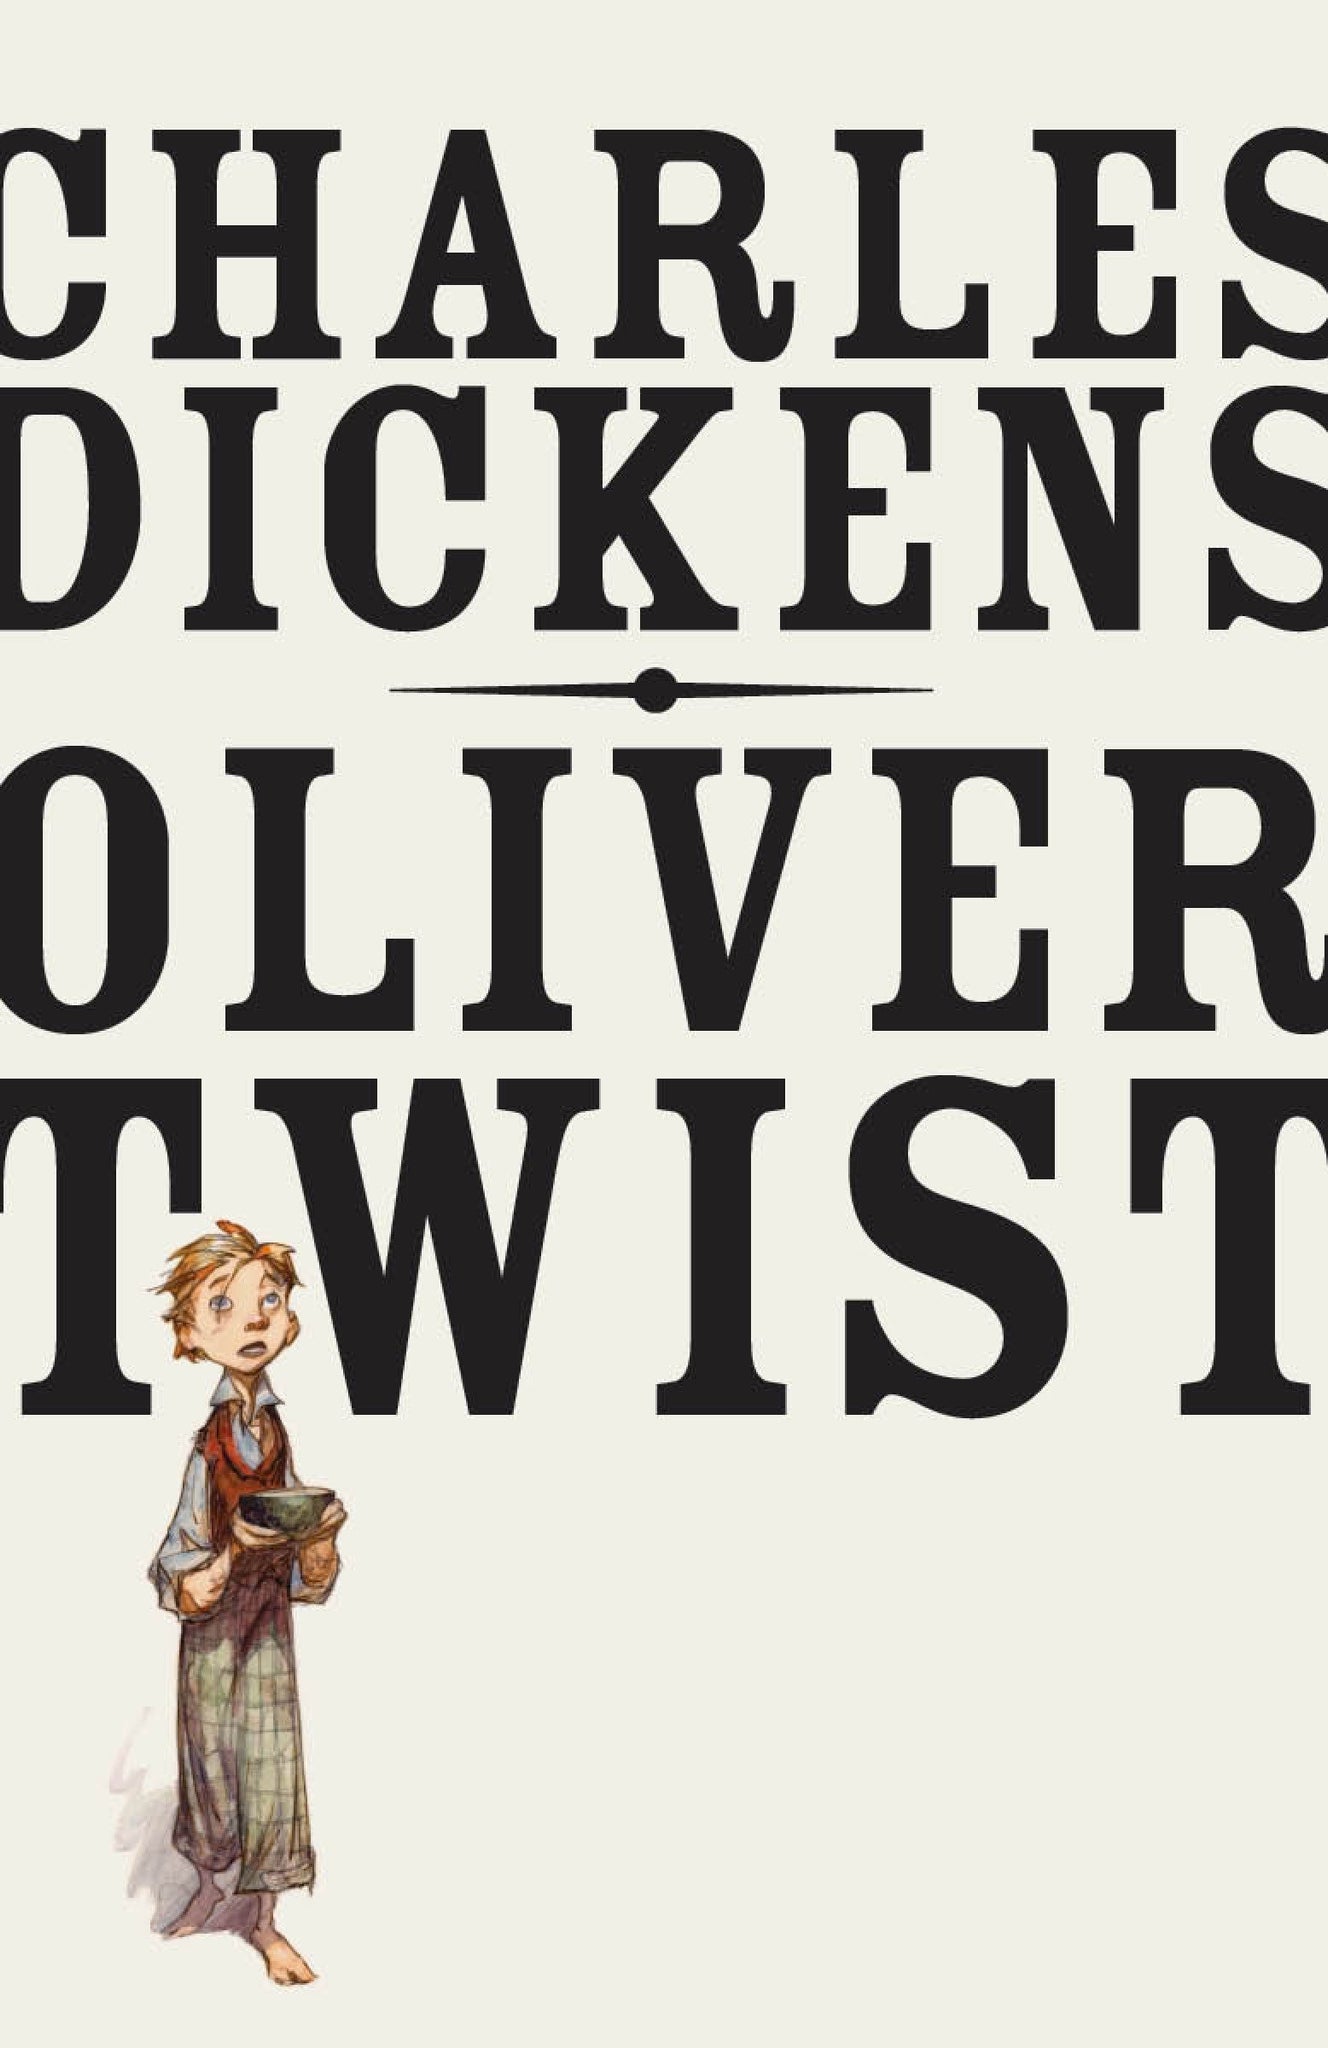 Oliver Twist by Charles Dickens - tpbk